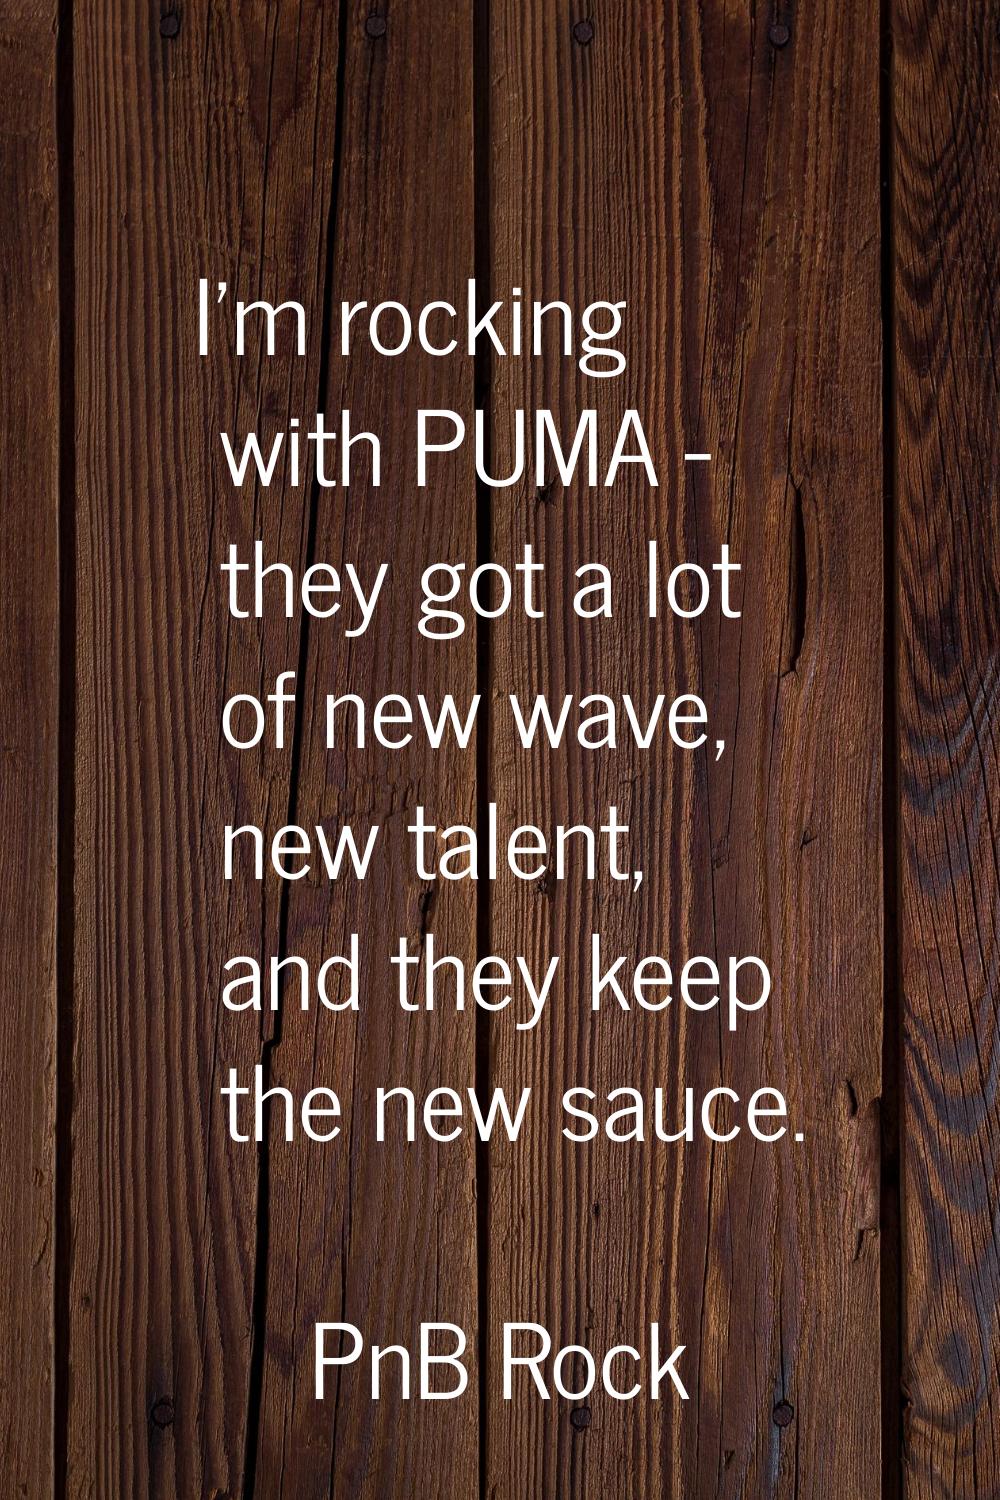 I'm rocking with PUMA - they got a lot of new wave, new talent, and they keep the new sauce.